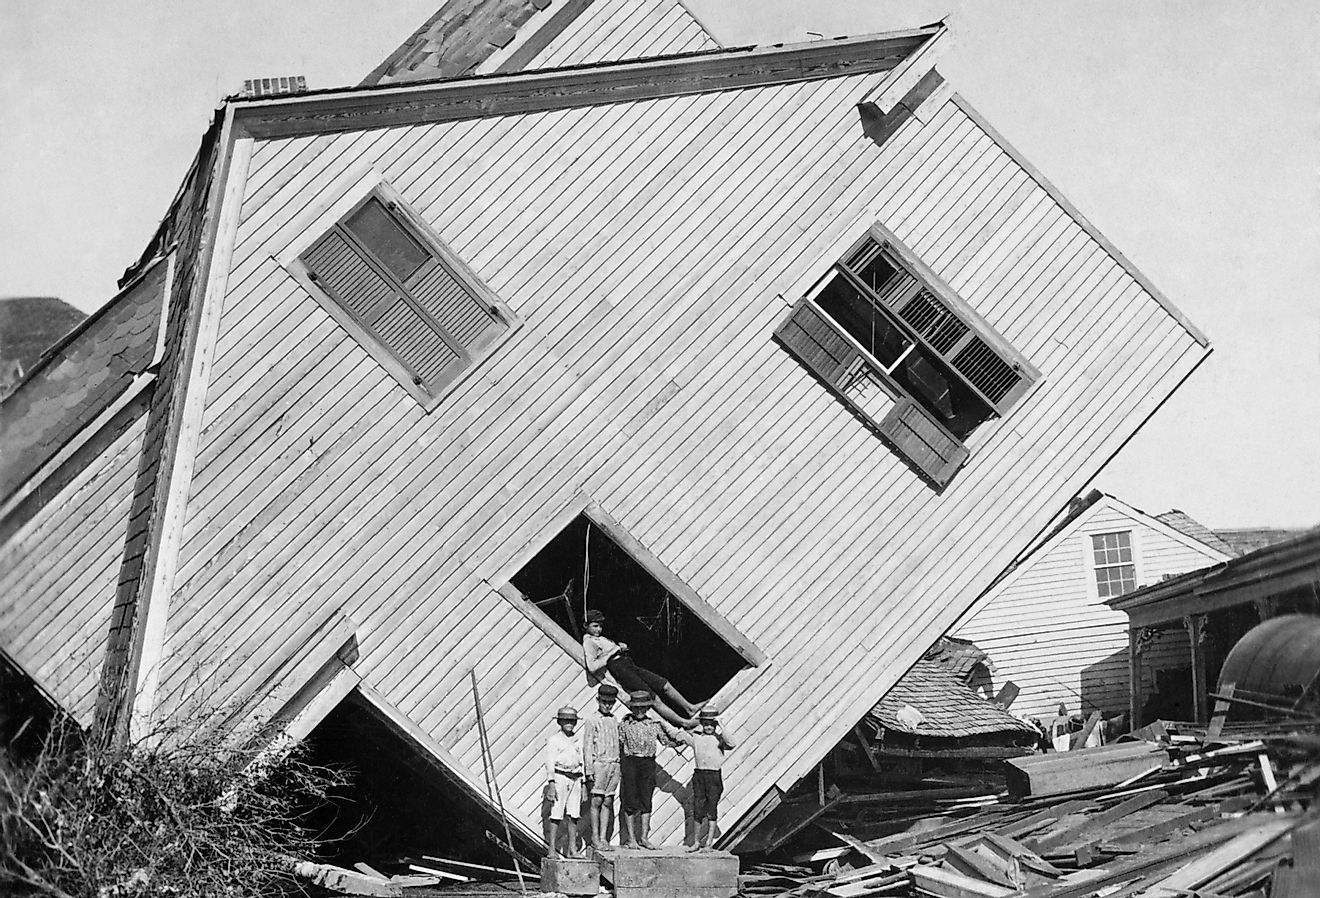 A house tipped on side after the 15 foot storm surge of the Galveston Hurricane of Sept. 1900. Image credit Everett Collection via Shutterstock